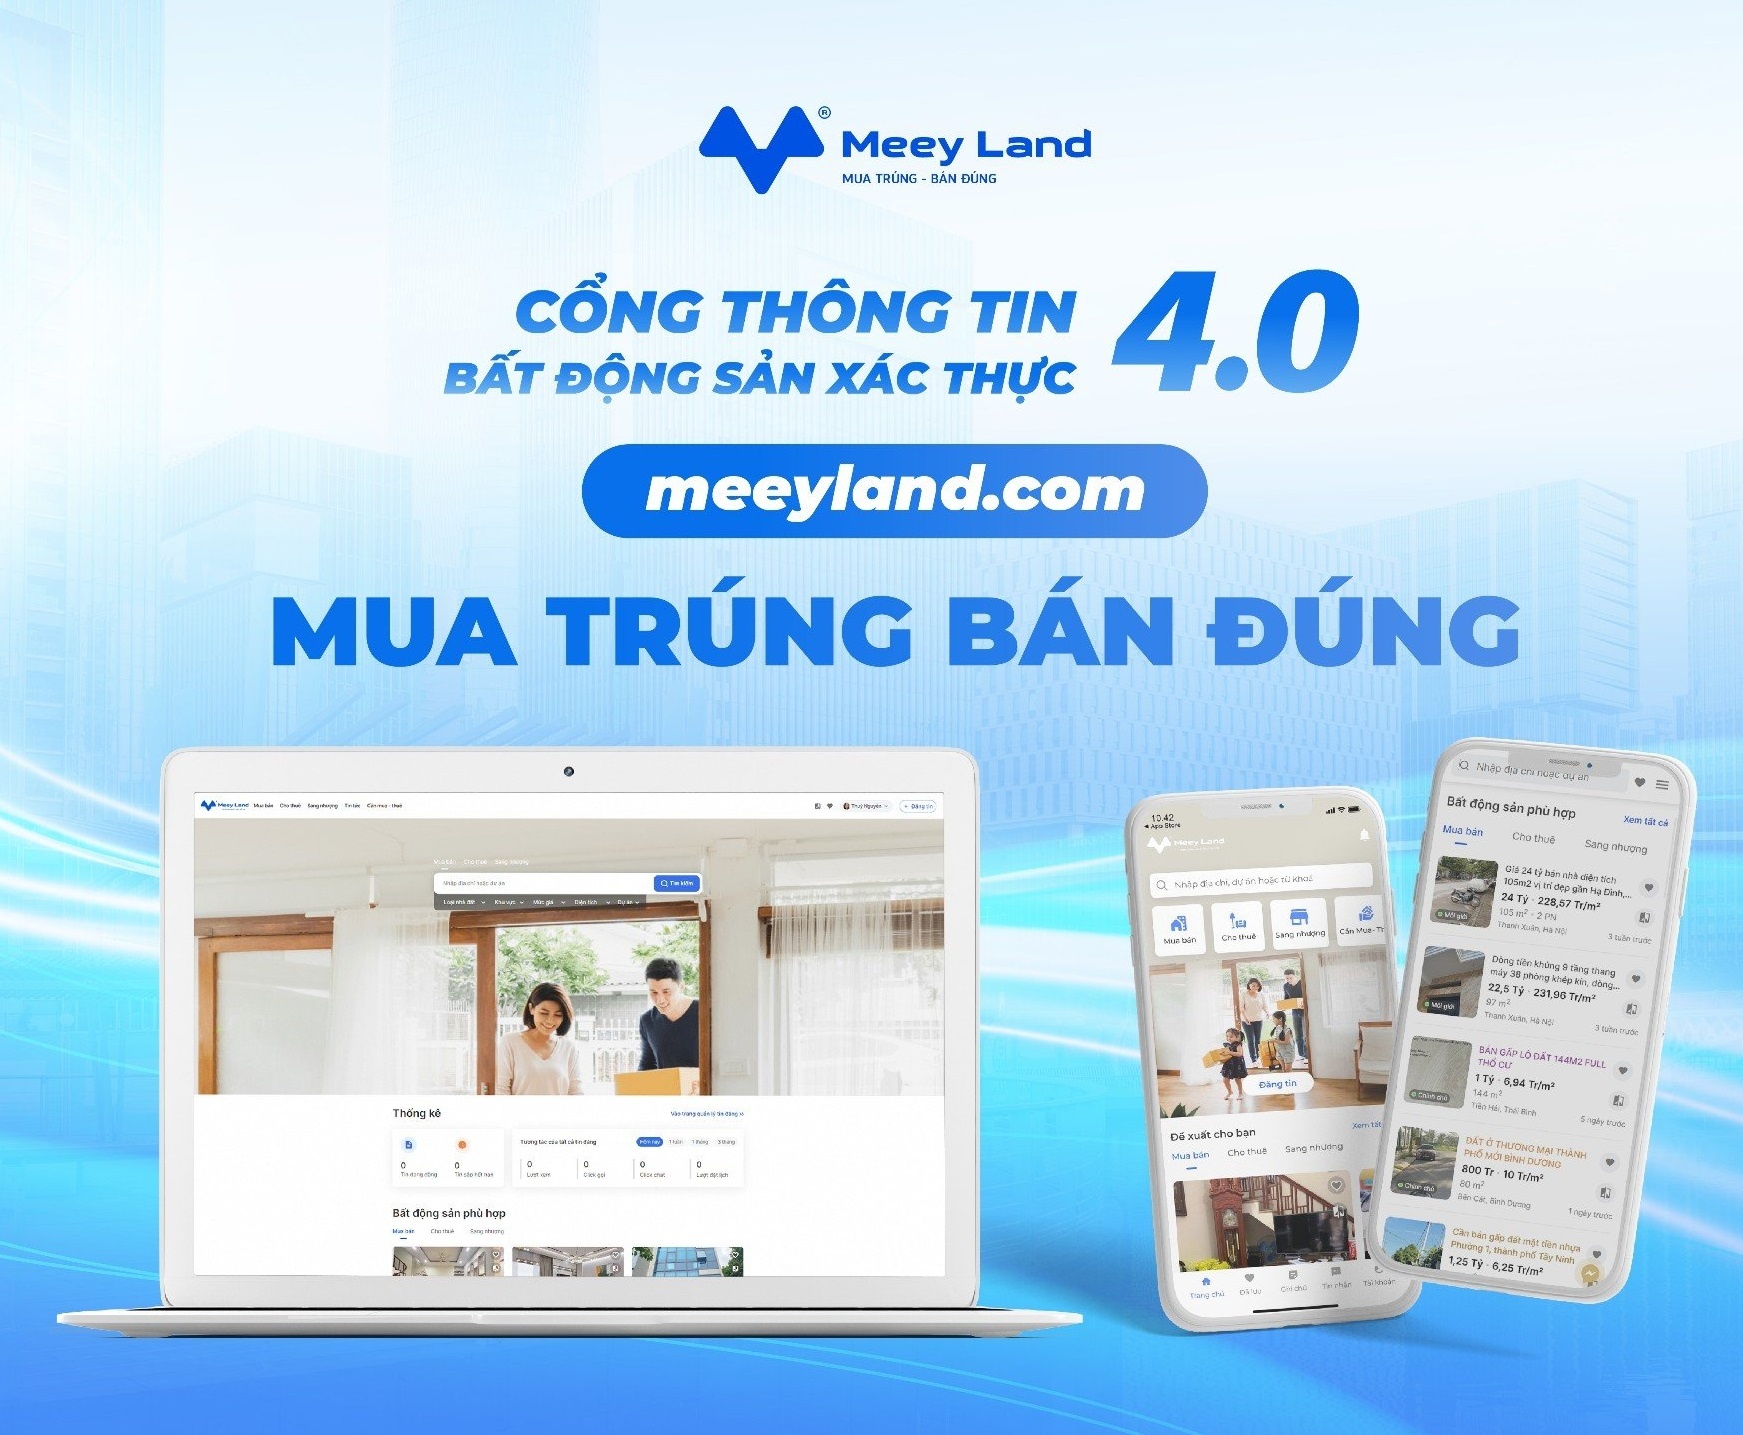 Meey Land anh 3